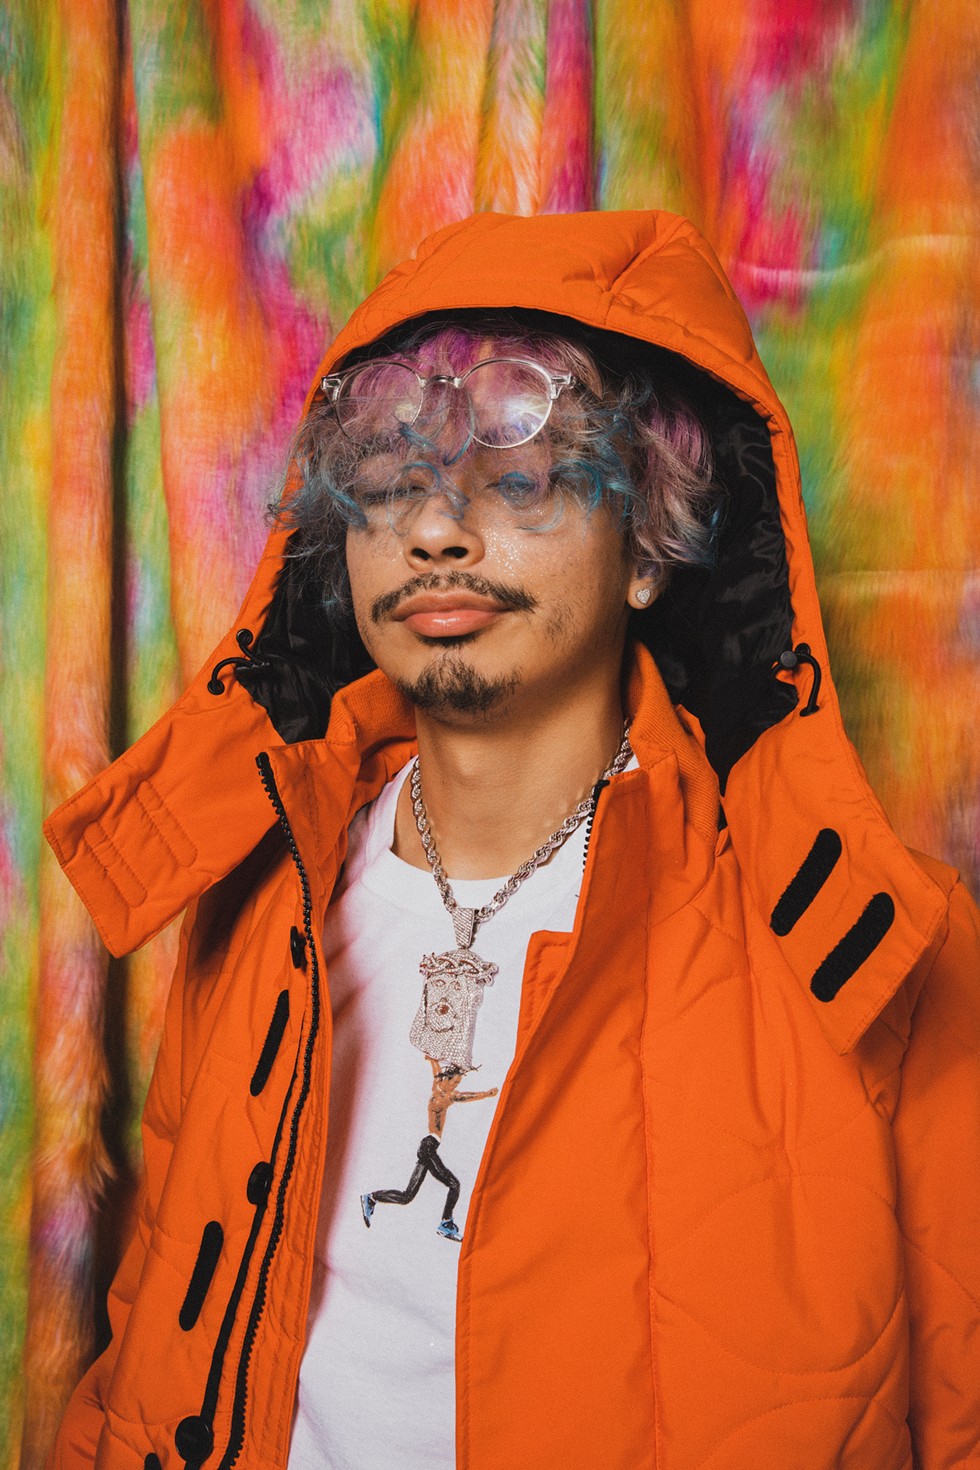 Built to Last?: Meet Lil Booty Call, the San Antonio SoundCloud Rapper Who Scored a Major-Label Deal